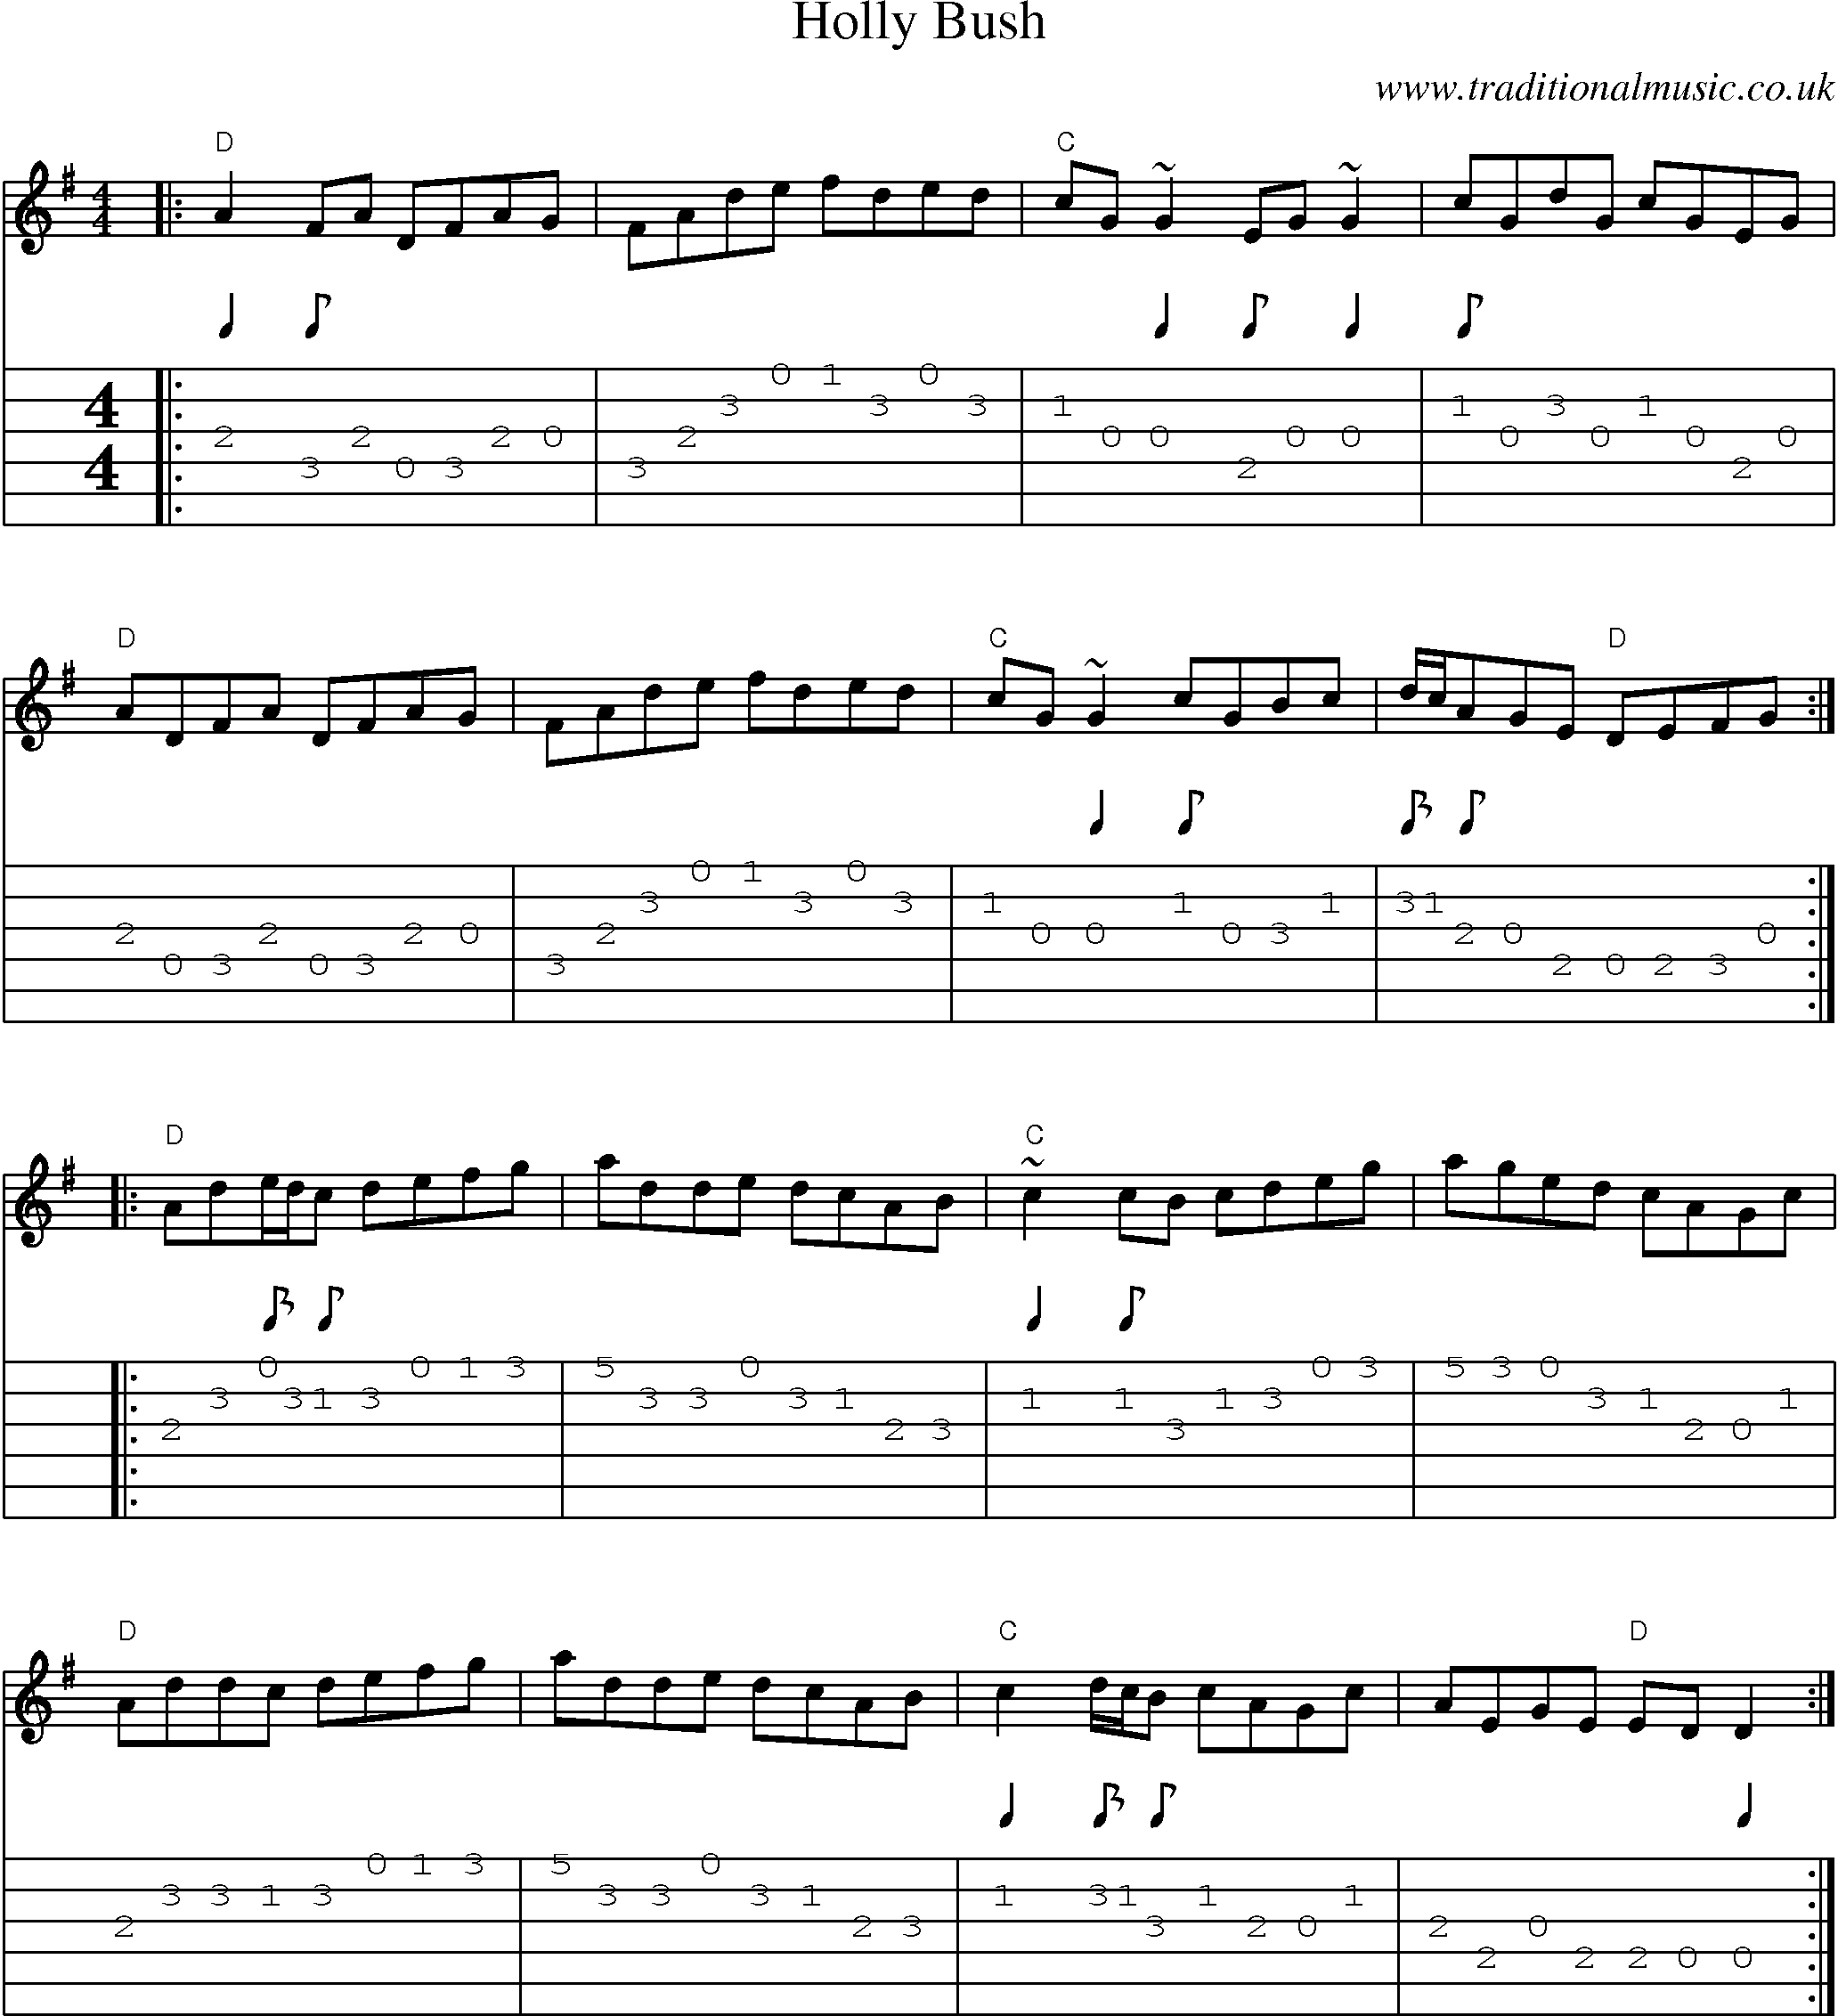 Music Score and Guitar Tabs for Holly Bush